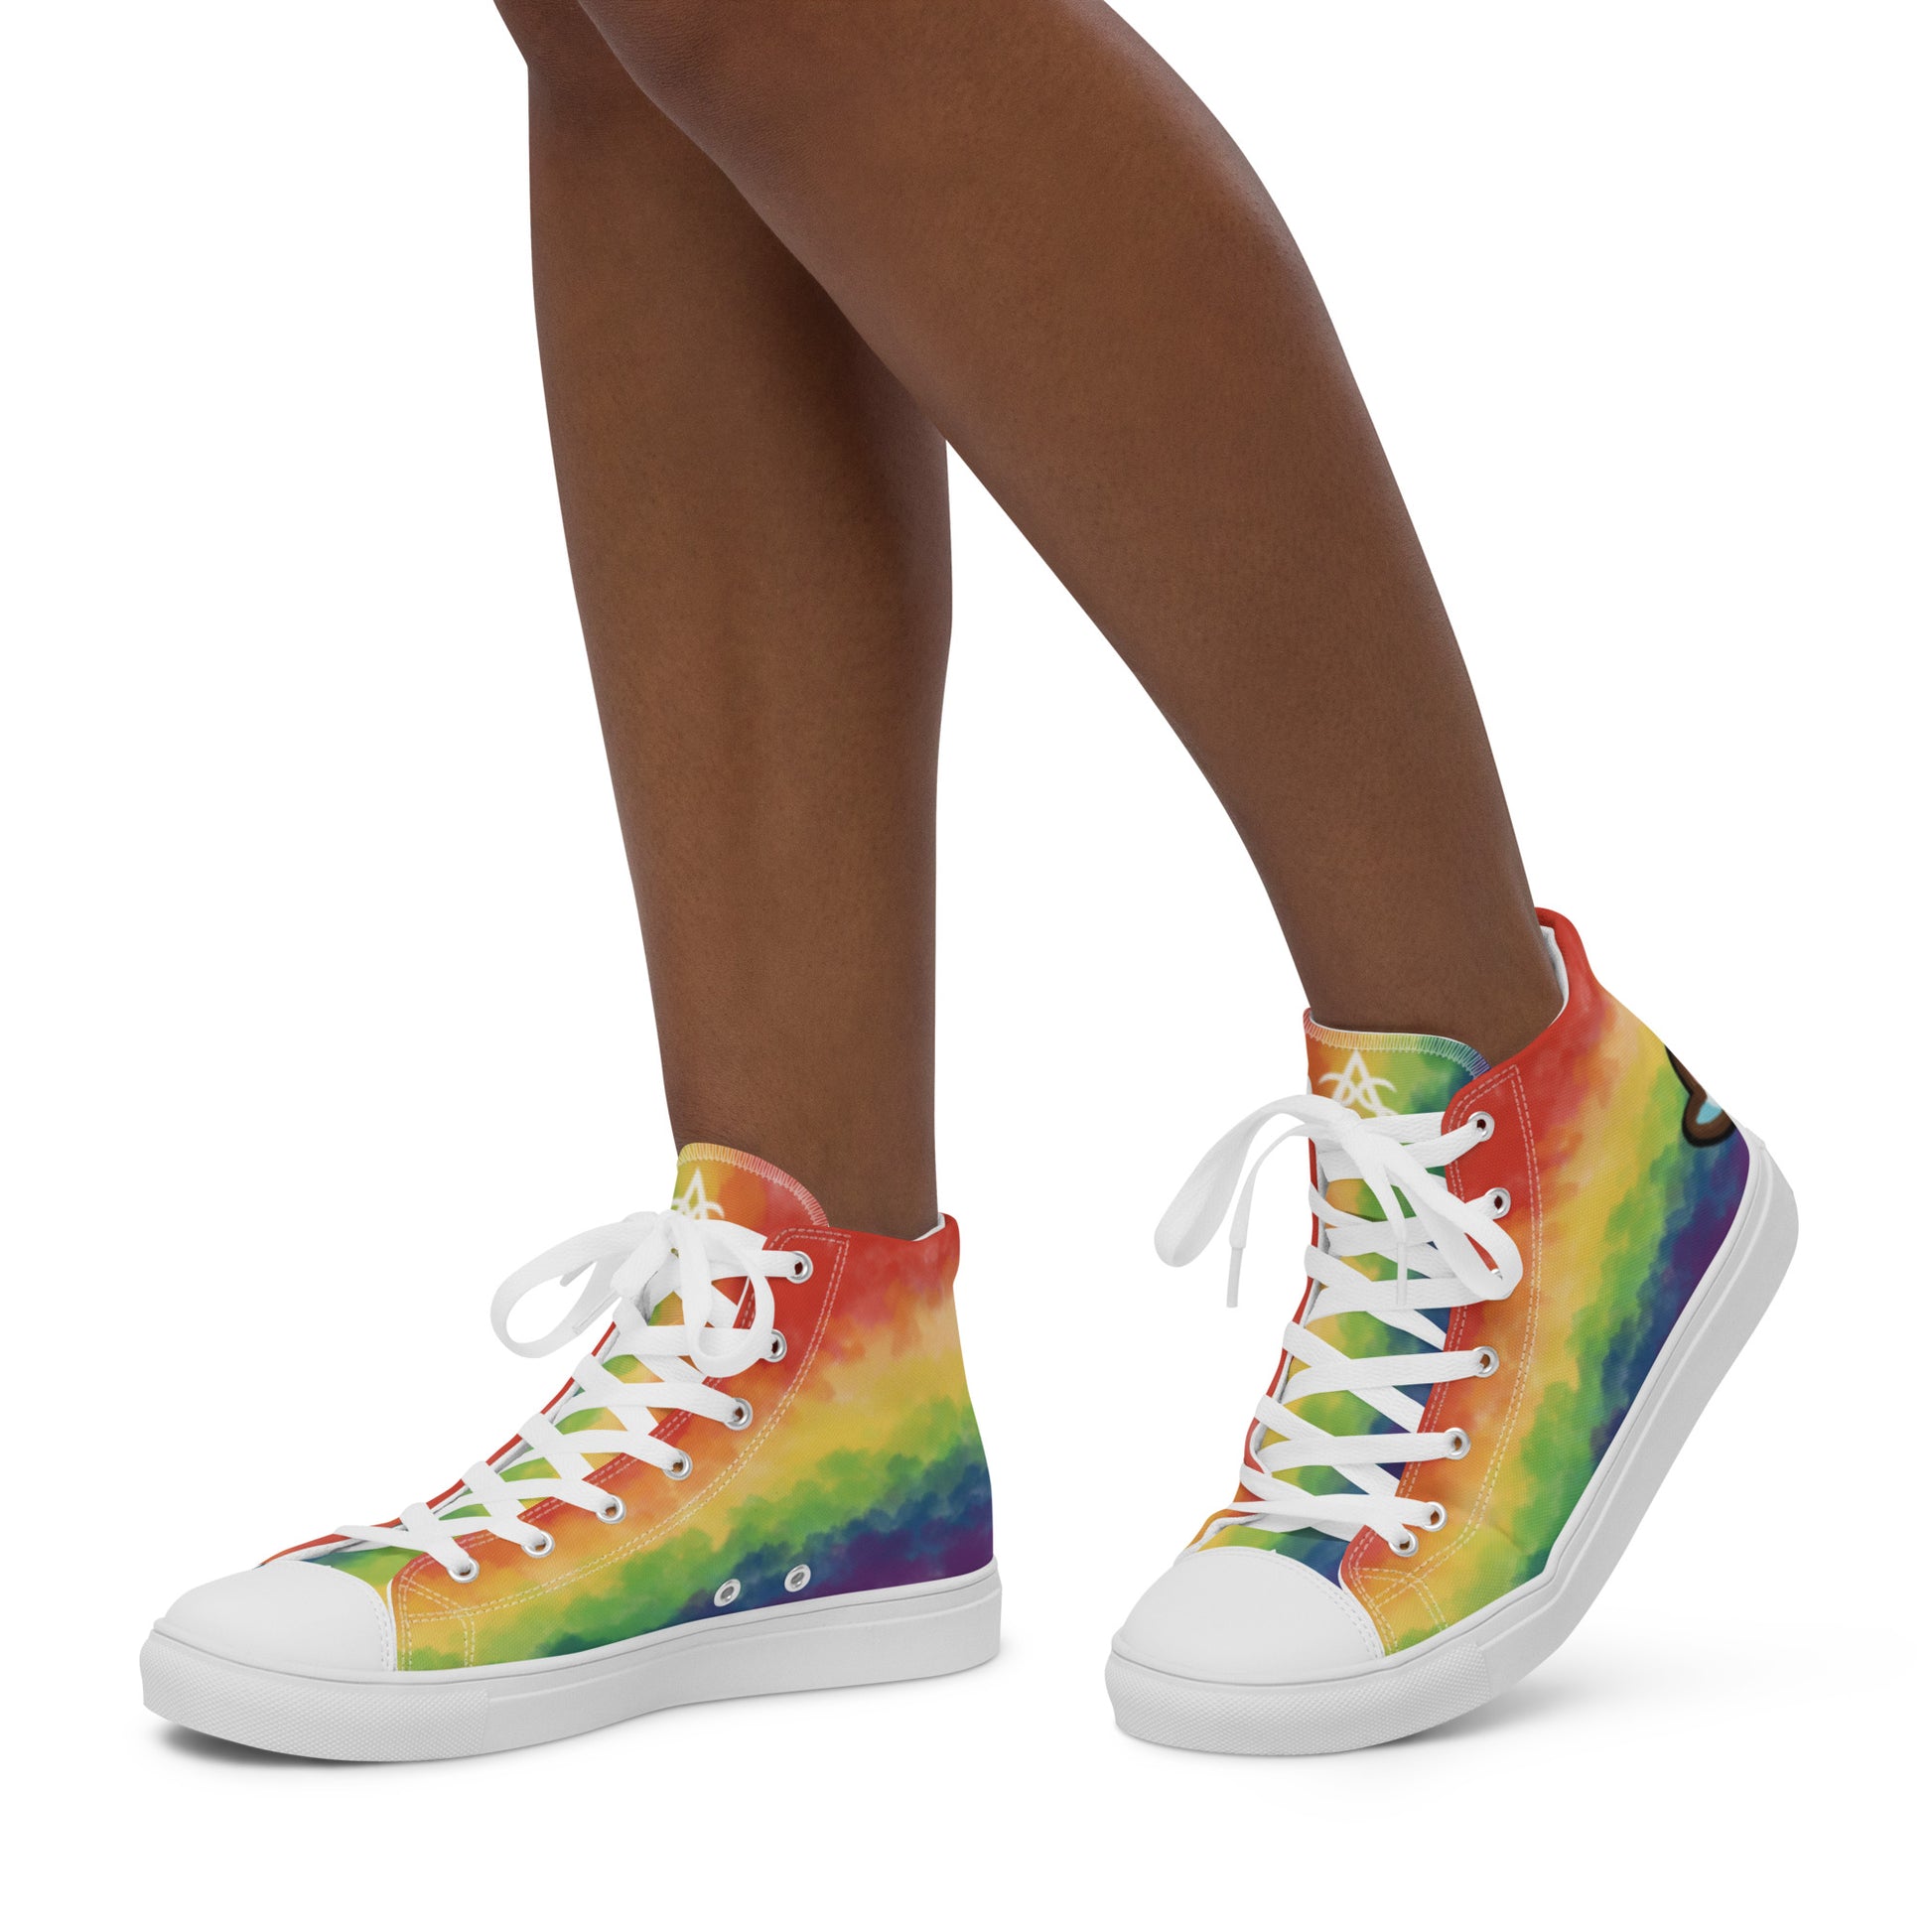 A model wears a pair of high top shoes with rainbow striped clouds on the sides and a double heart in black and brown with the trans flag colors inside.